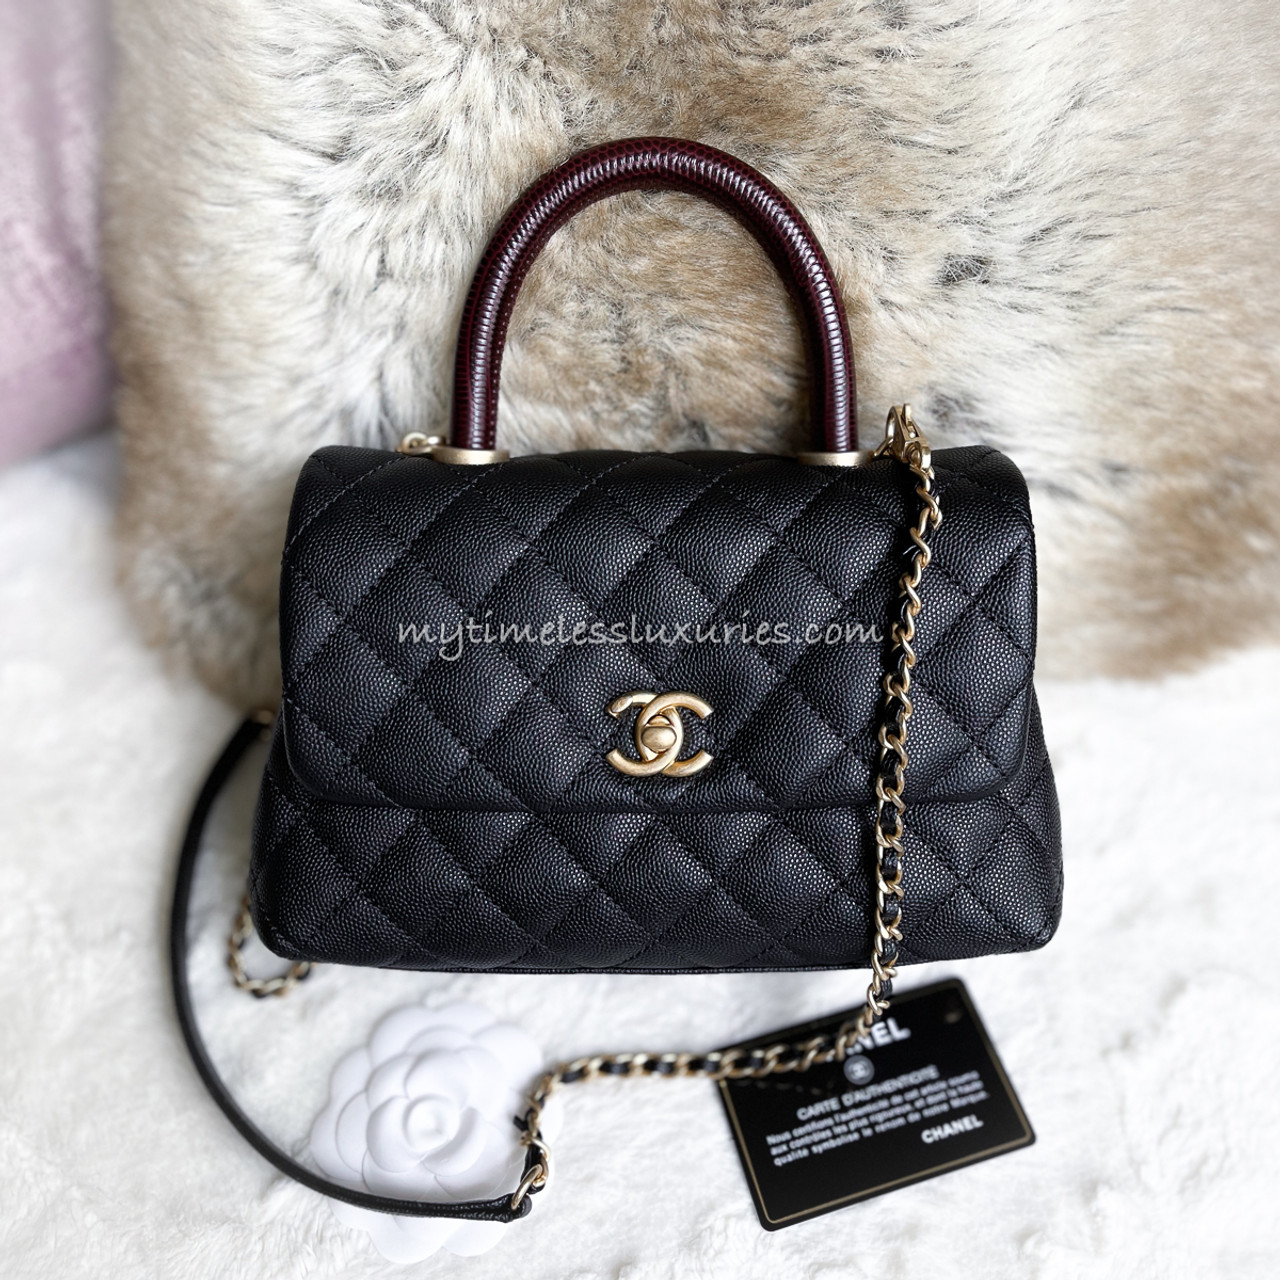 Chanel Small Mini Coco Handle Black Burgundy New Timeless Luxuries